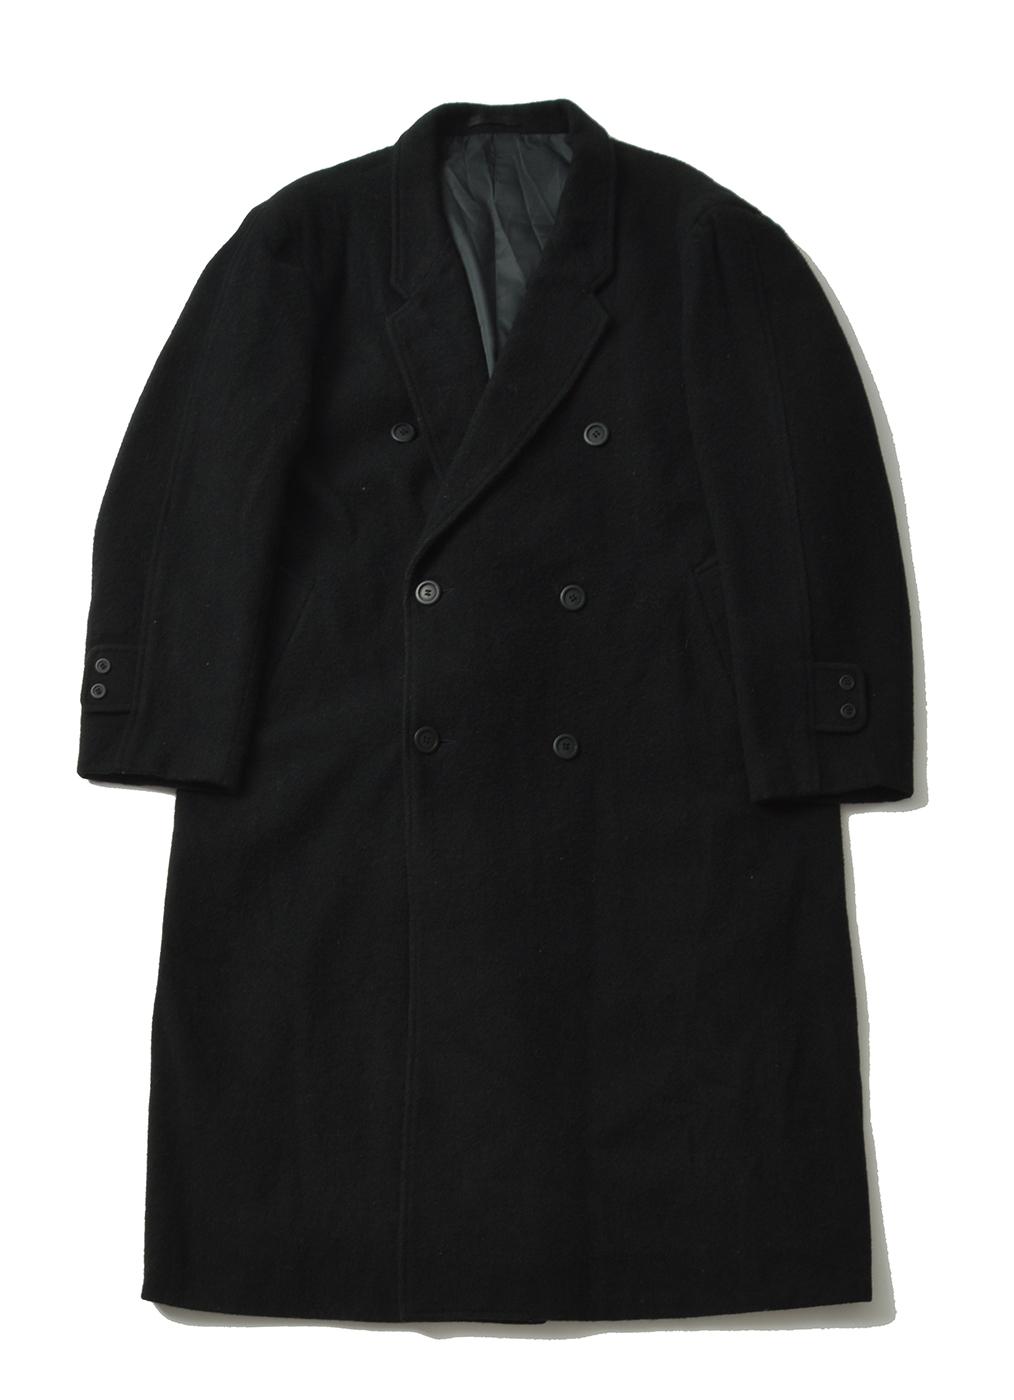 (Made in JAPAN) SENT HOMME wool double coat